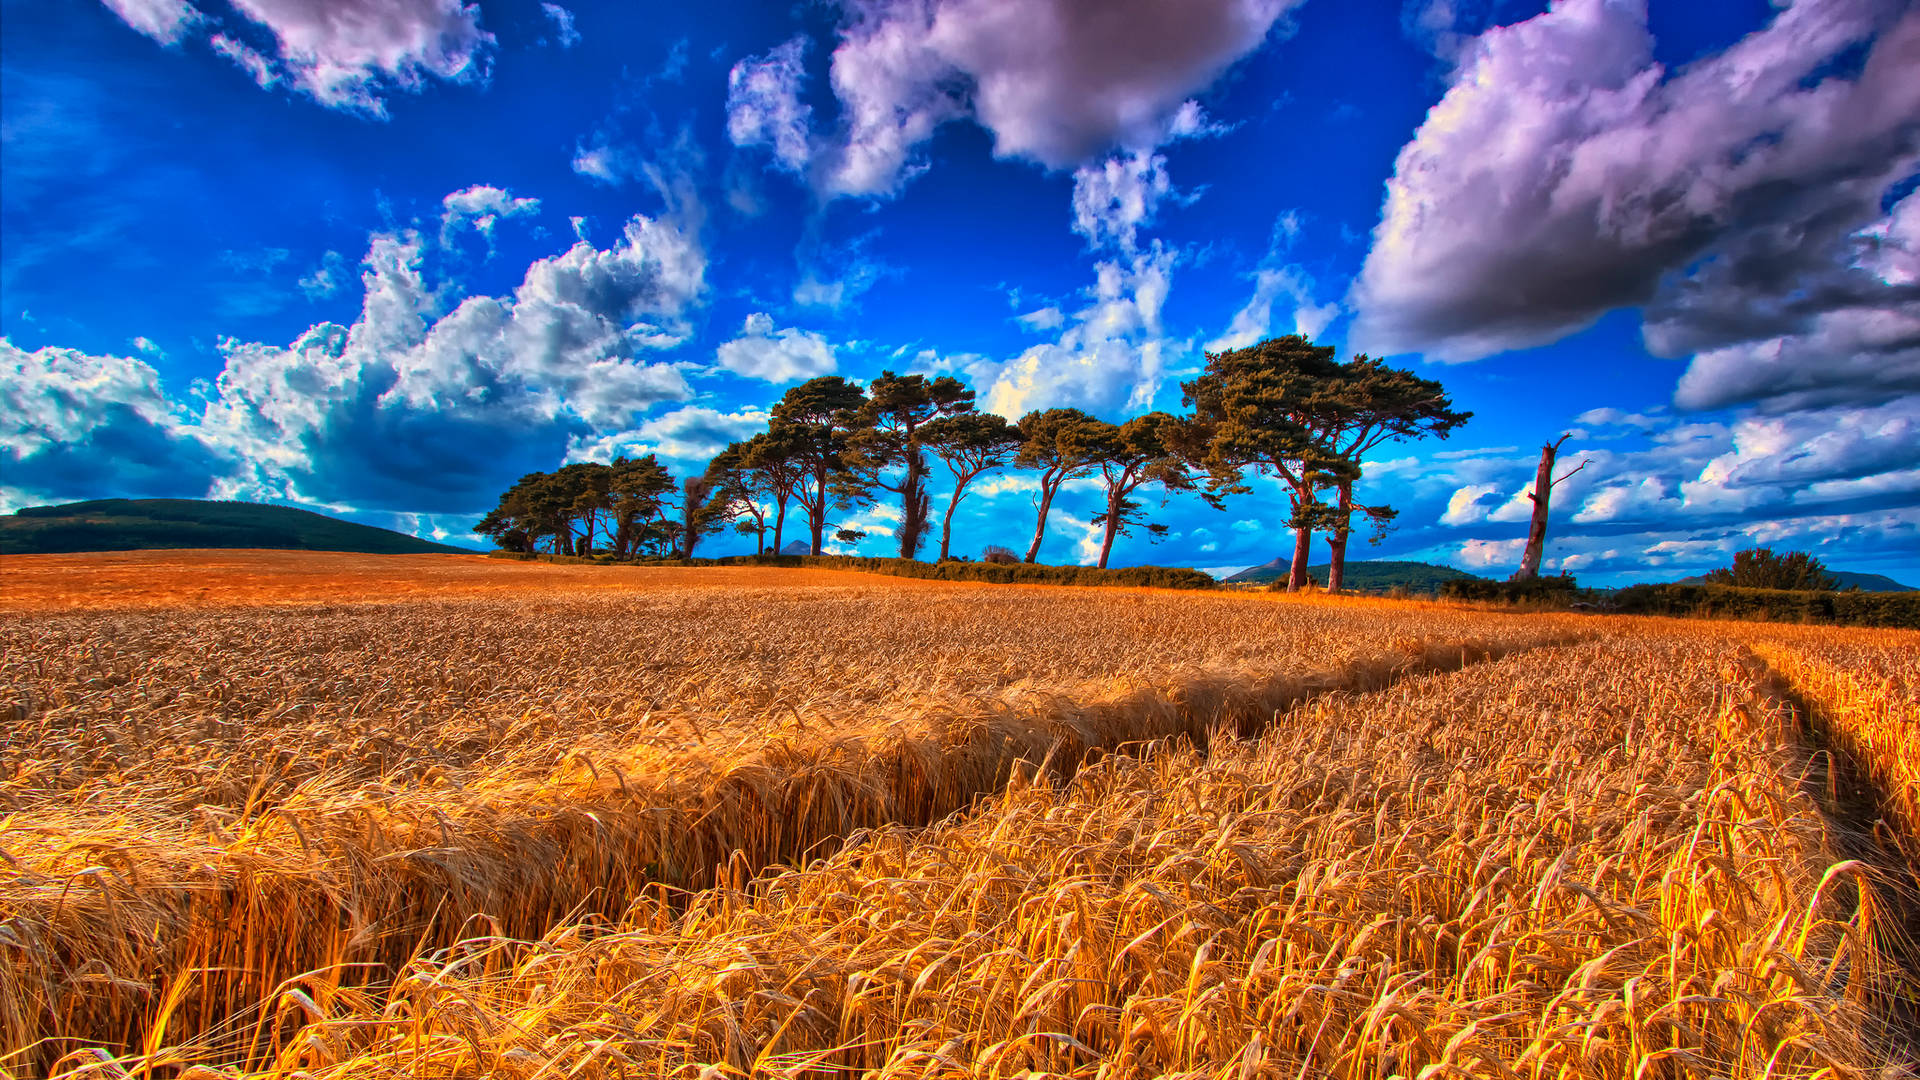 Wheat Field With Trees At The Backdrop Wallpaper